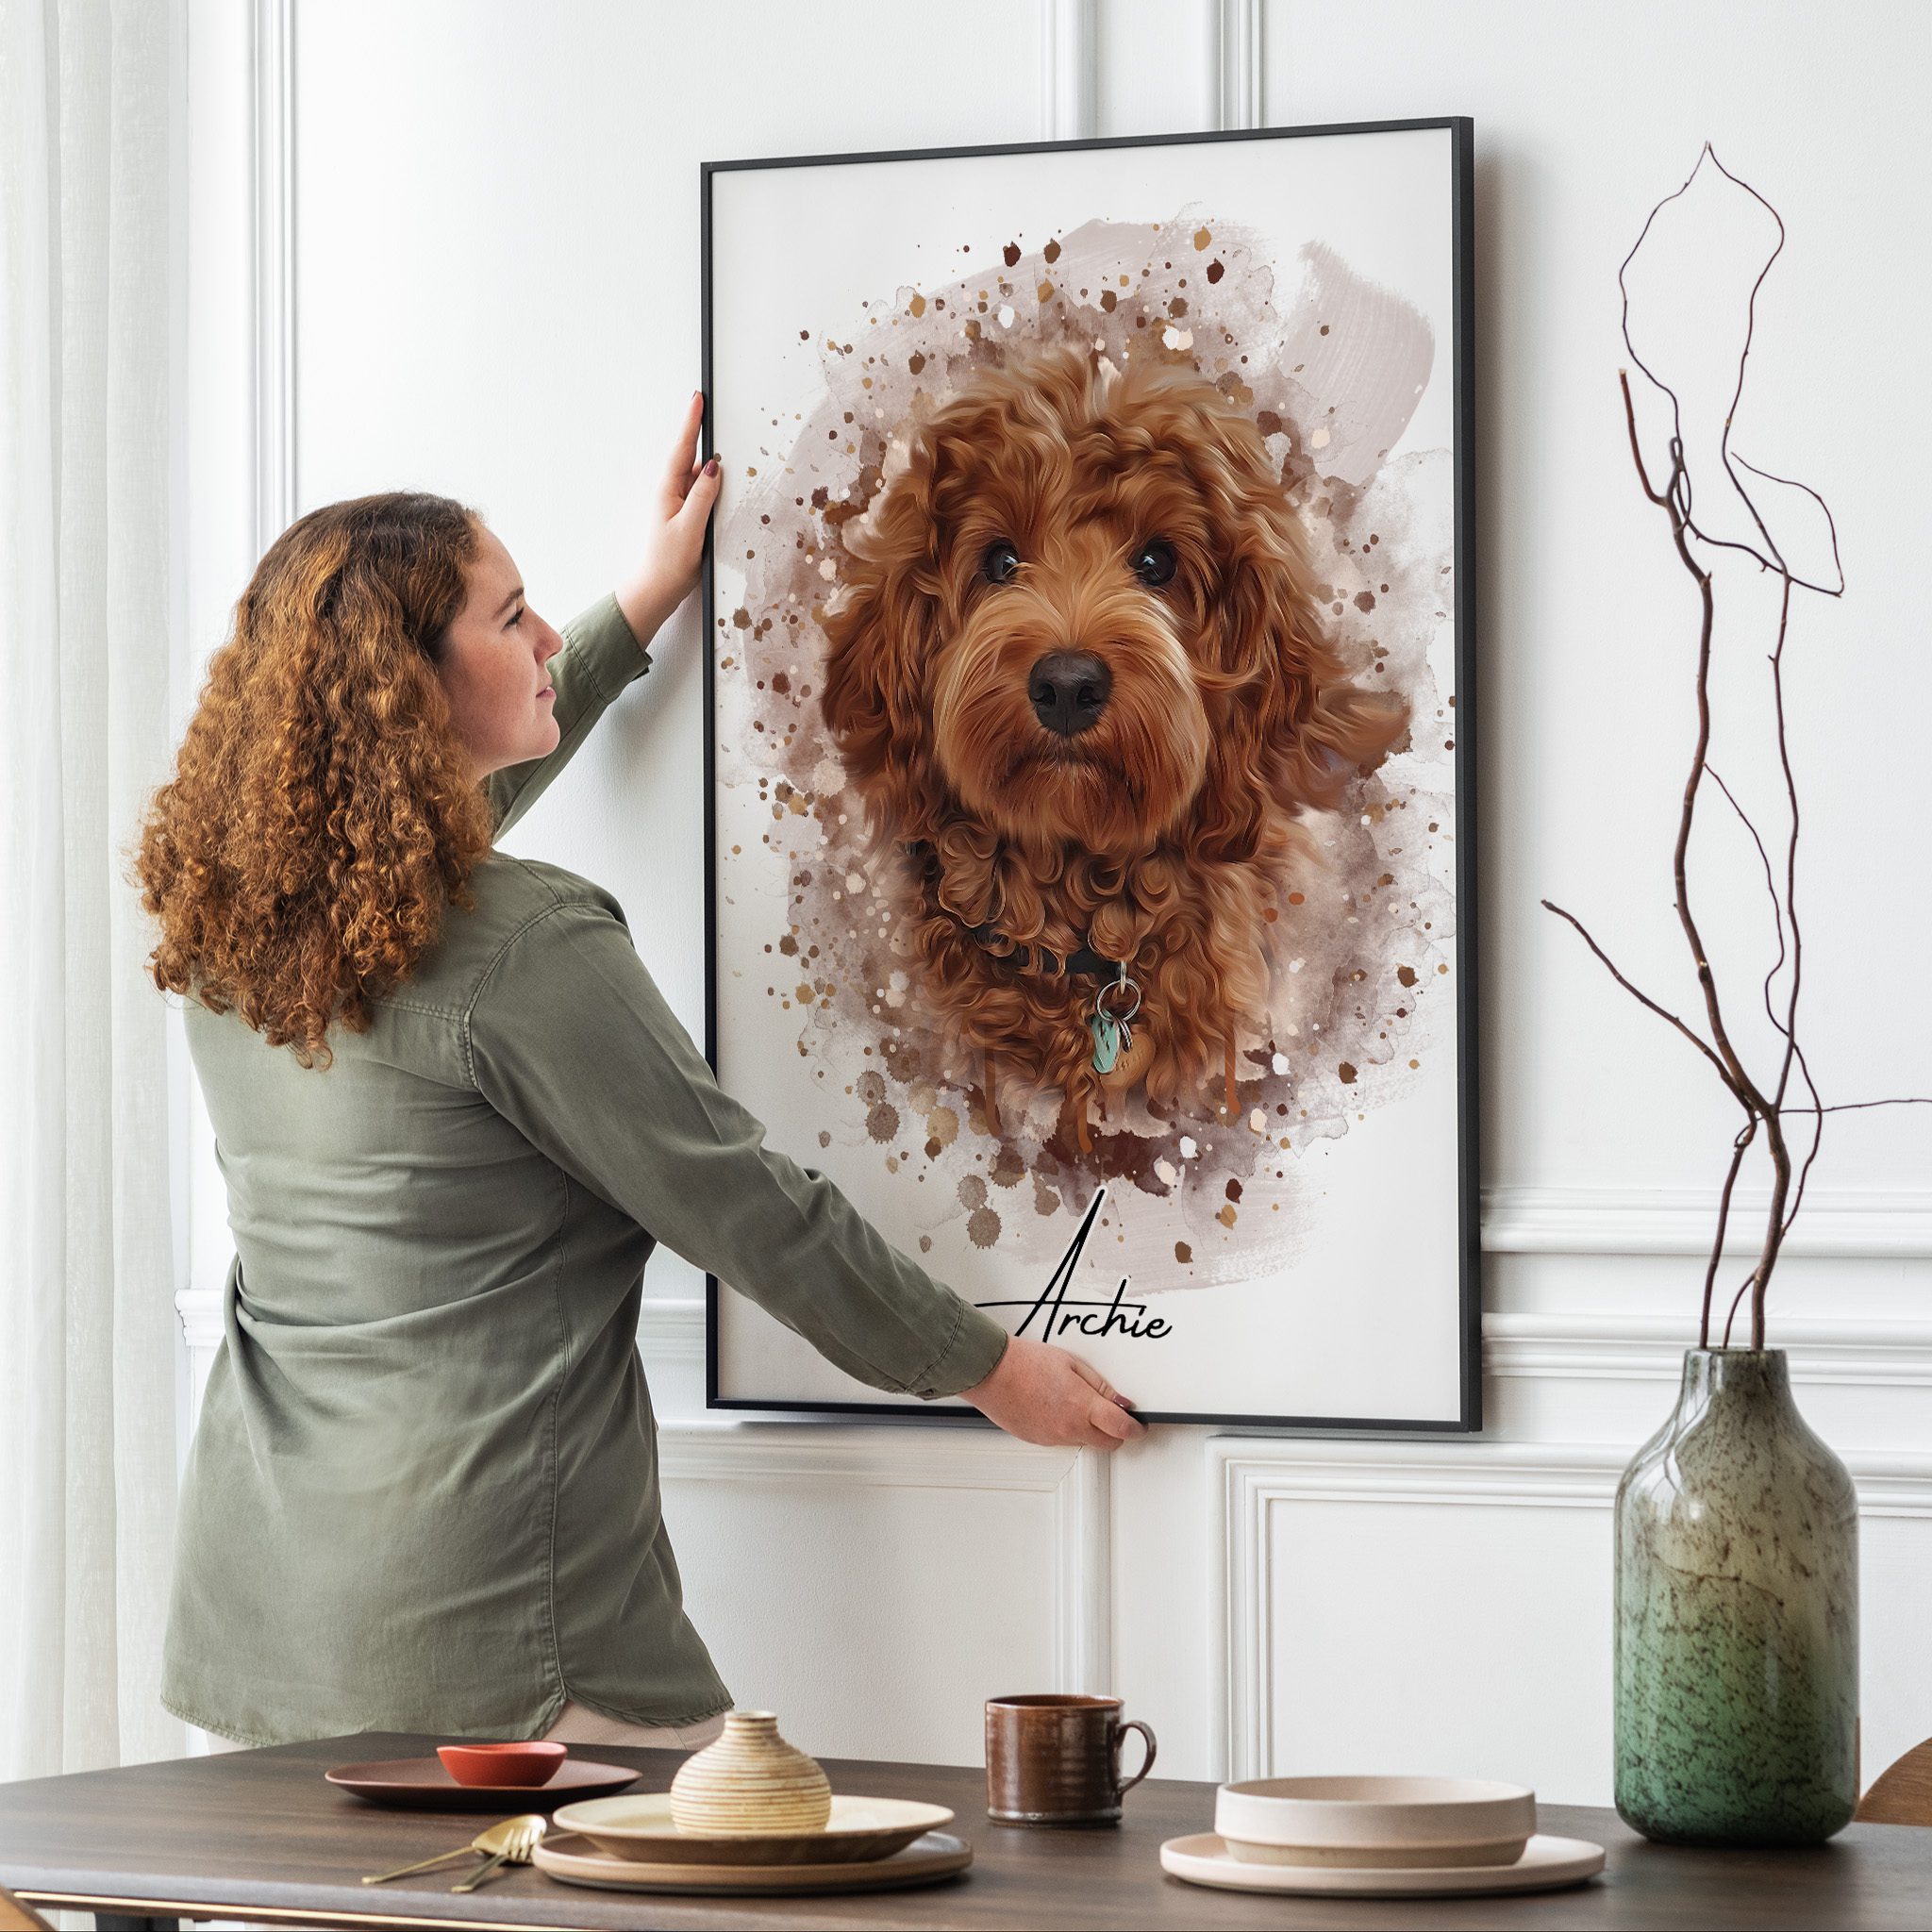 Your pet drawn as a watercolour image and printed as a black framed poster print